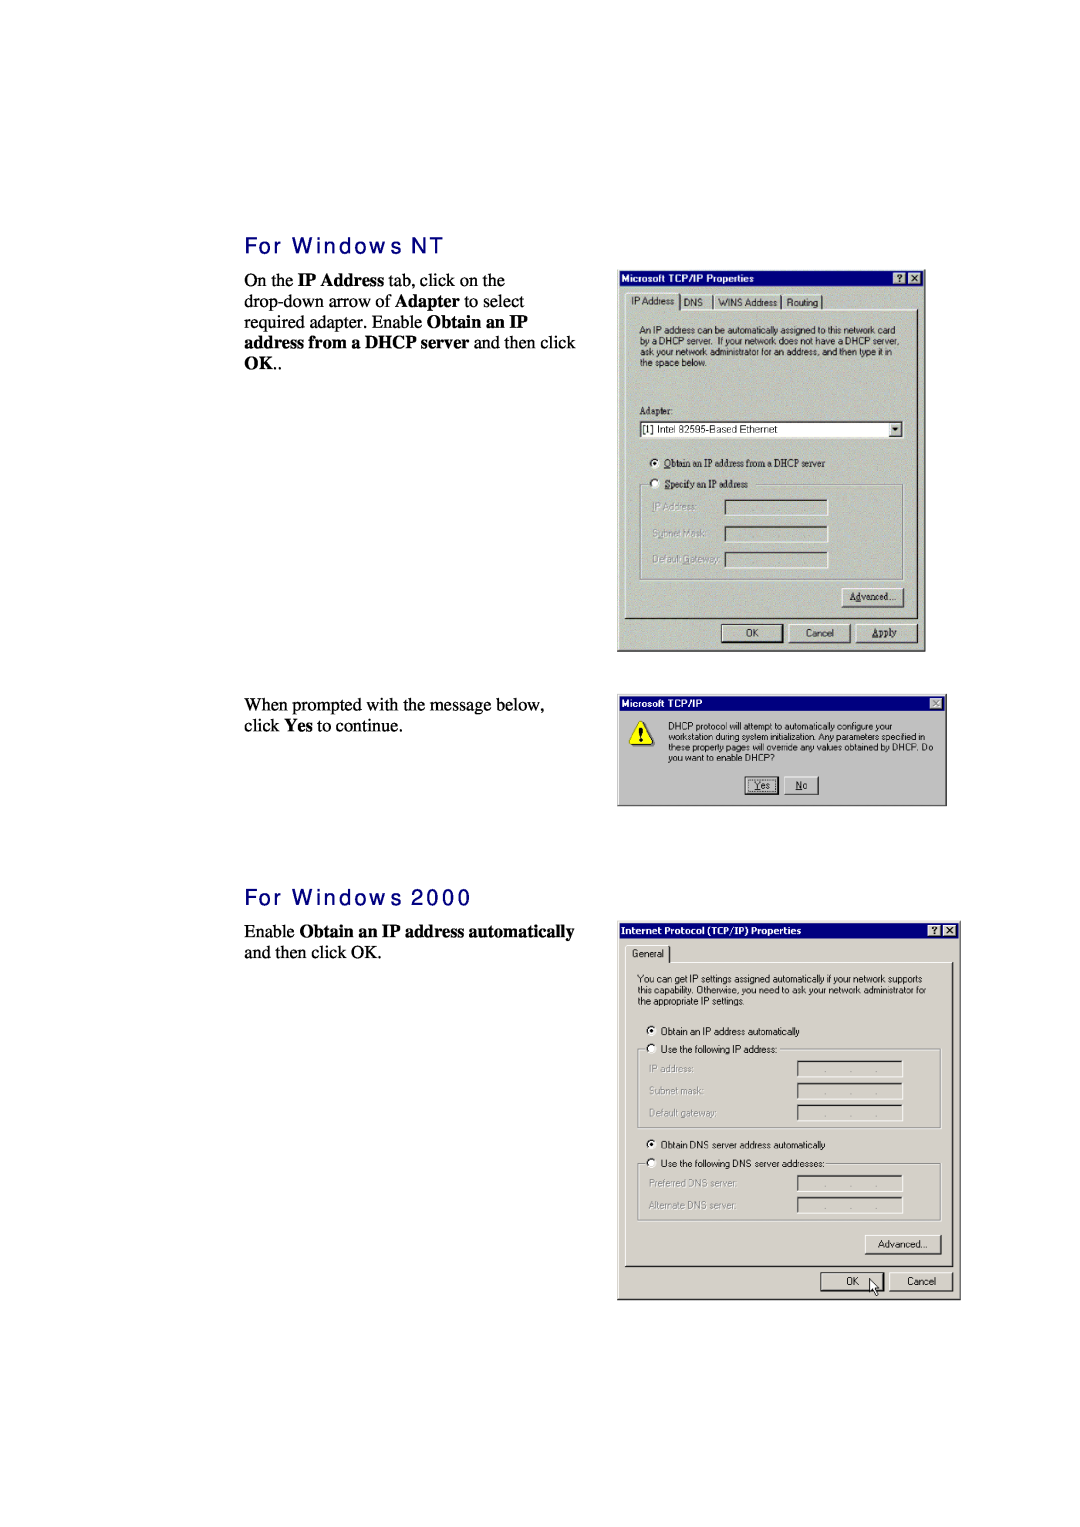 Siemens CL-010-I manual For Windows NT, When prompted with the message below, click Yes to continue 